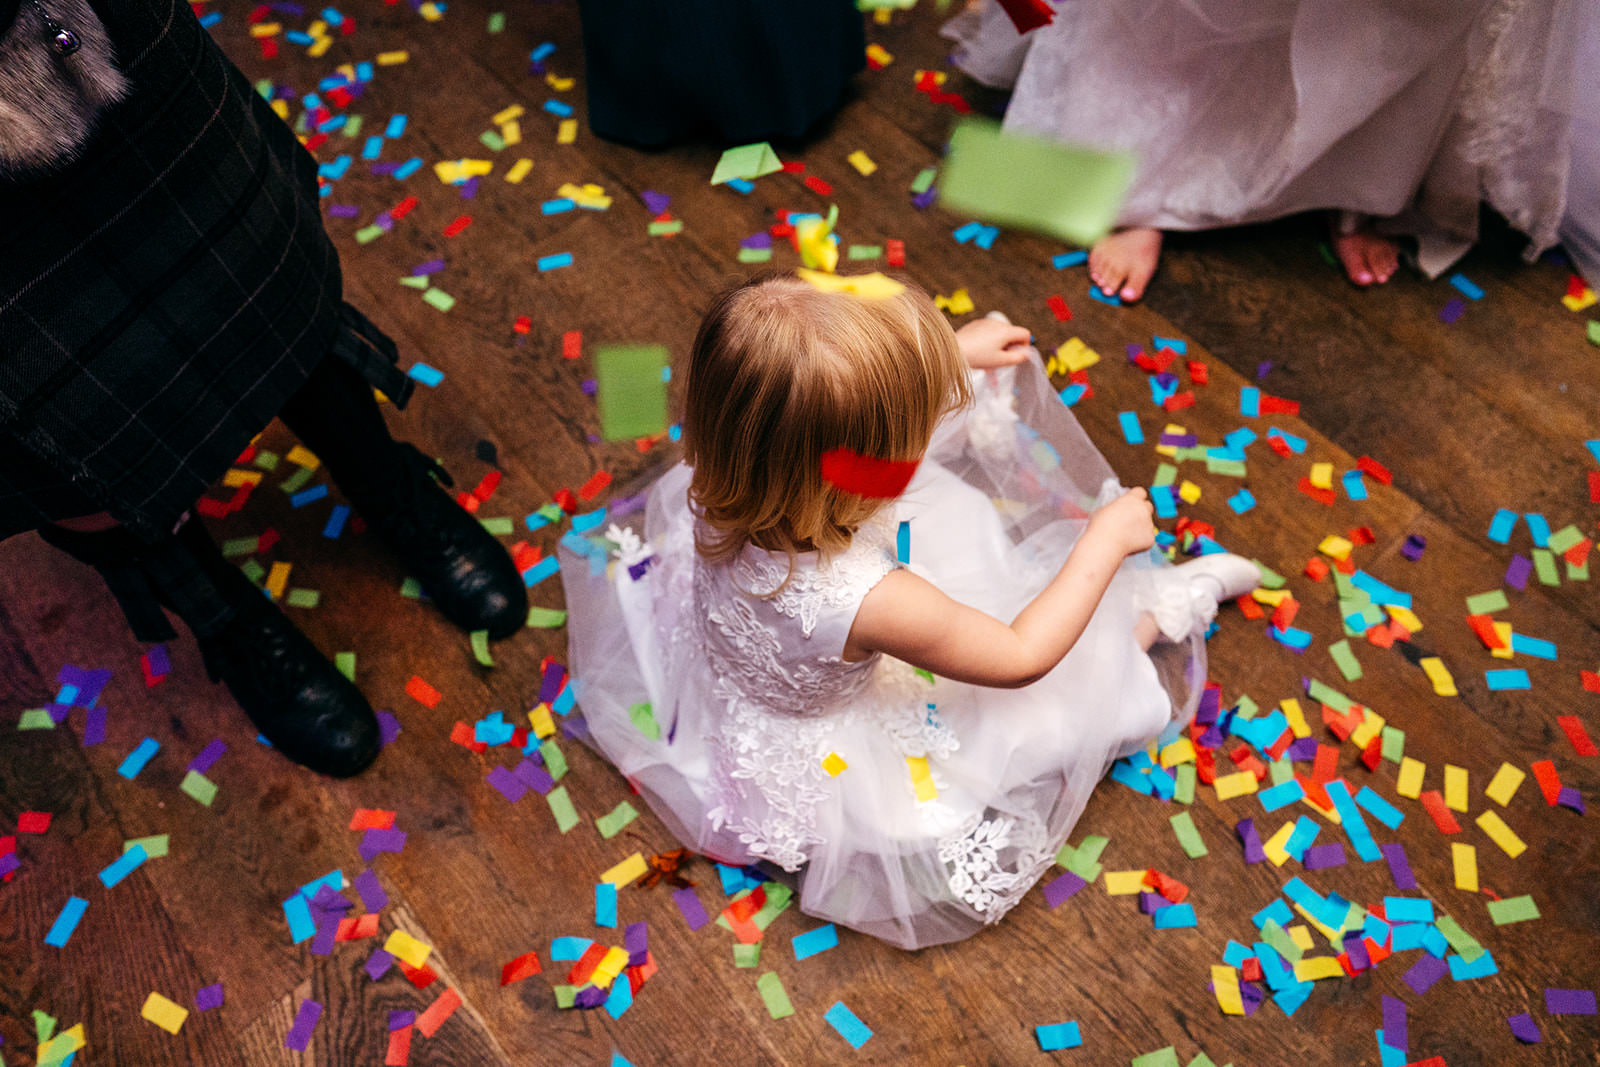 Flower girl playing with discarded confetti on dancefloor 